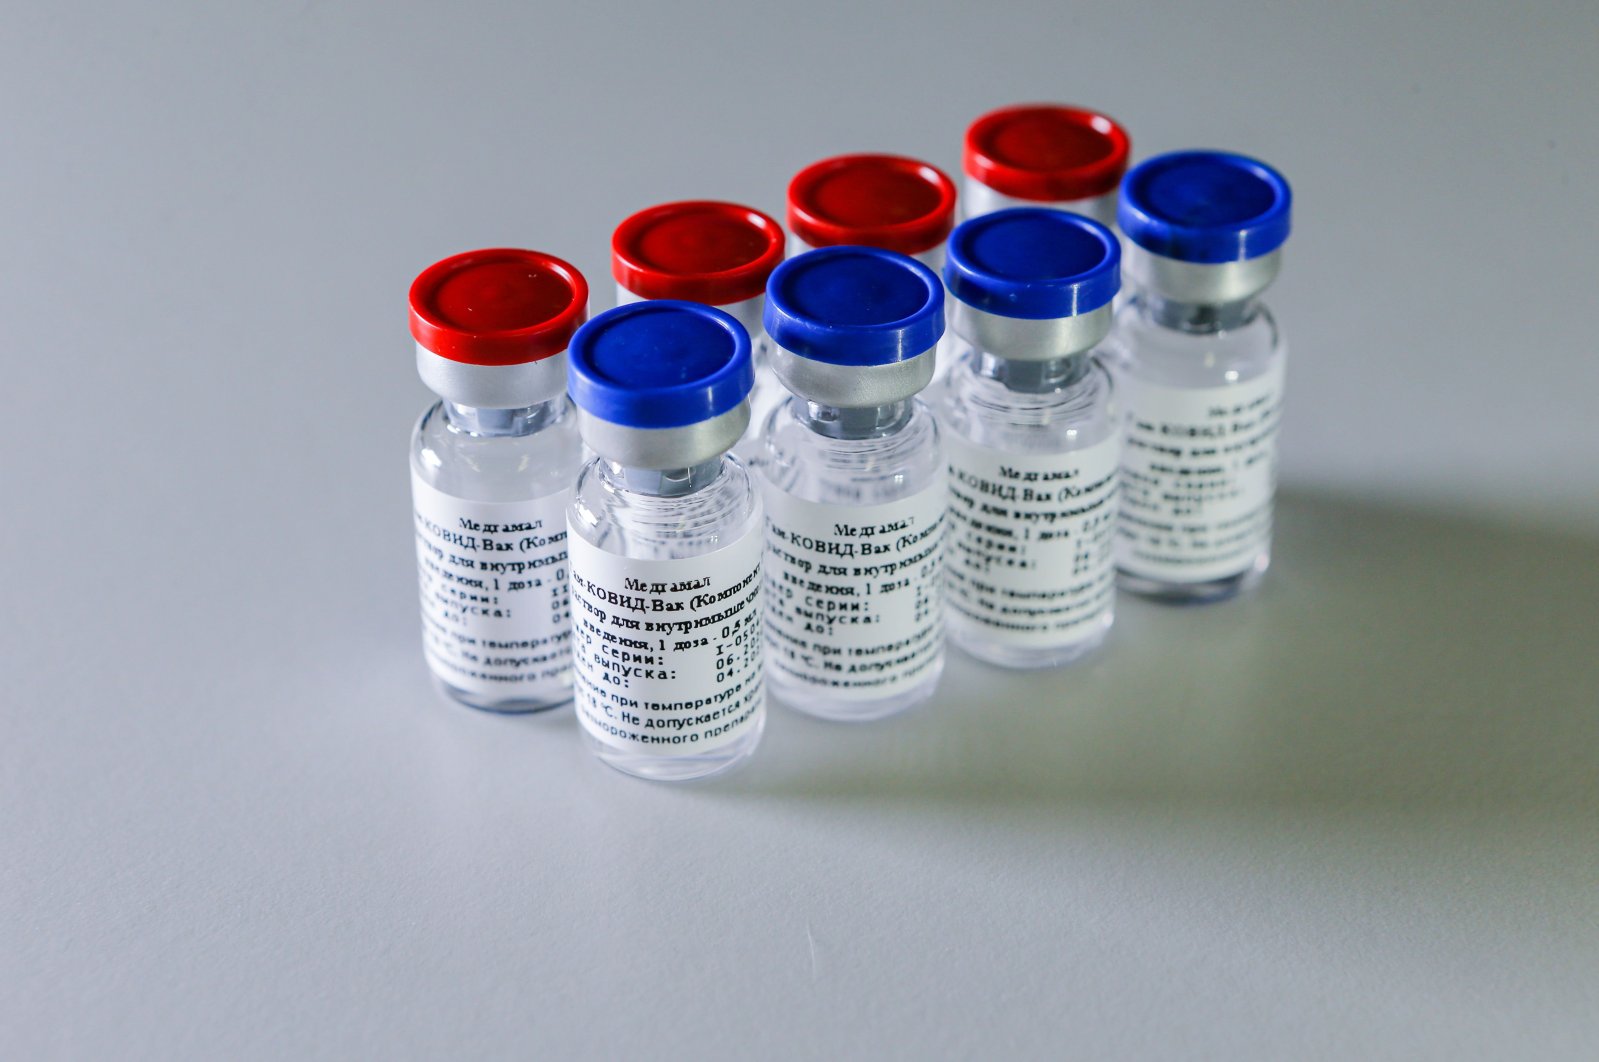 This handout picture taken on August 6, 2020 and provided by the Russian Direct Investment Fund shows the vaccine against the coronavirus disease, developed by the Gamaleya Research Institute of Epidemiology and Microbiology. (AFP Photo / Russian Direct Investment Fund / Handout)